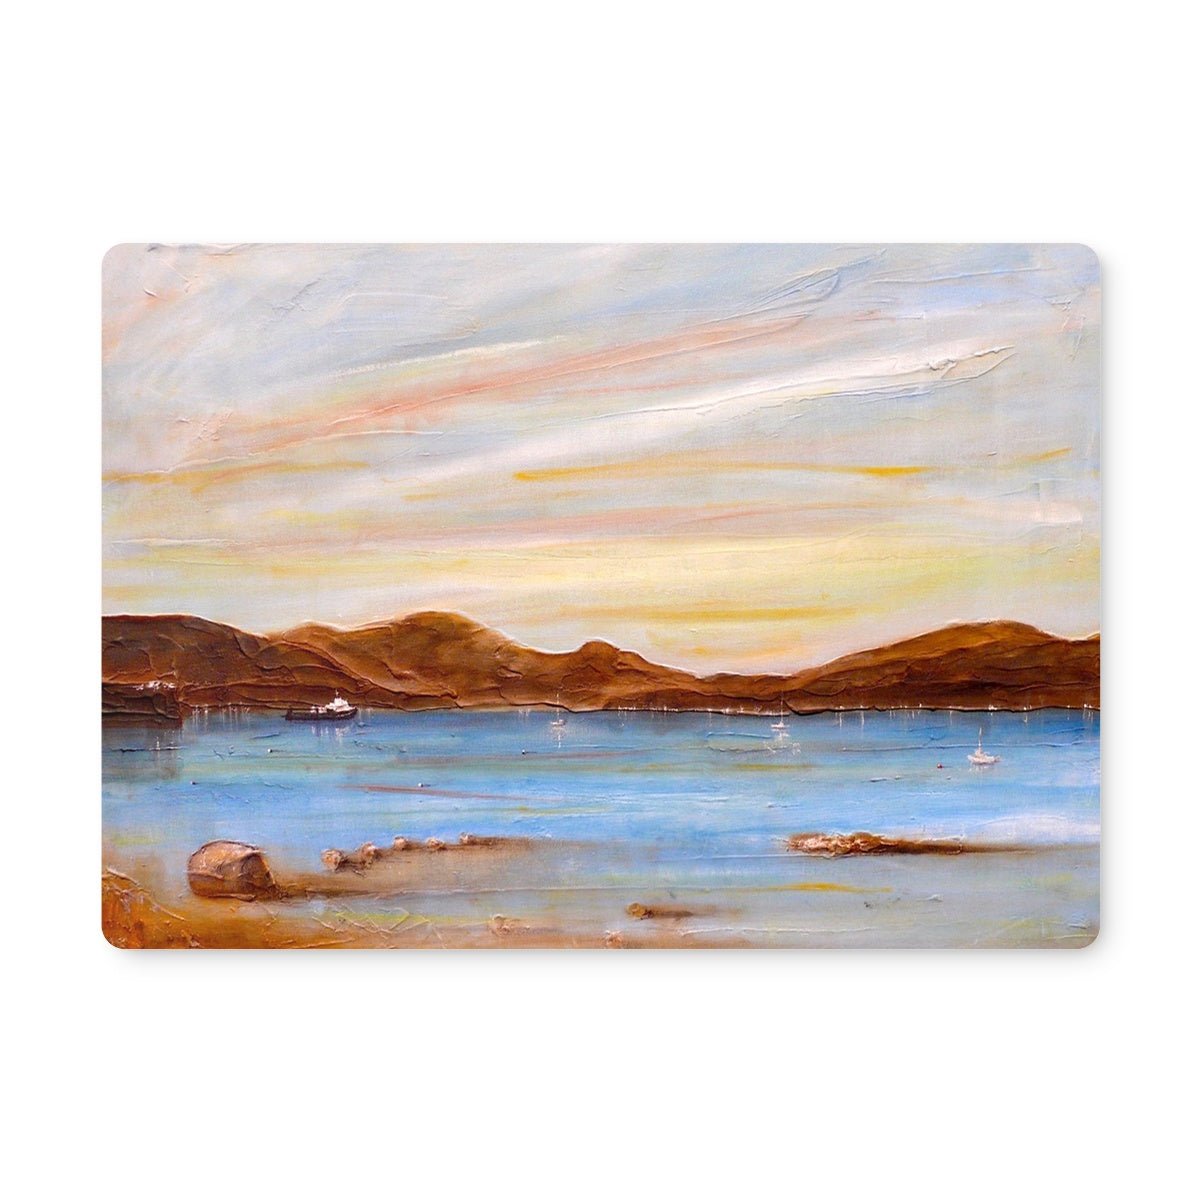 The Last Ferry To Dunoon Art Gifts Placemat-Placemats-River Clyde Art Gallery-2 Placemats-Paintings, Prints, Homeware, Art Gifts From Scotland By Scottish Artist Kevin Hunter